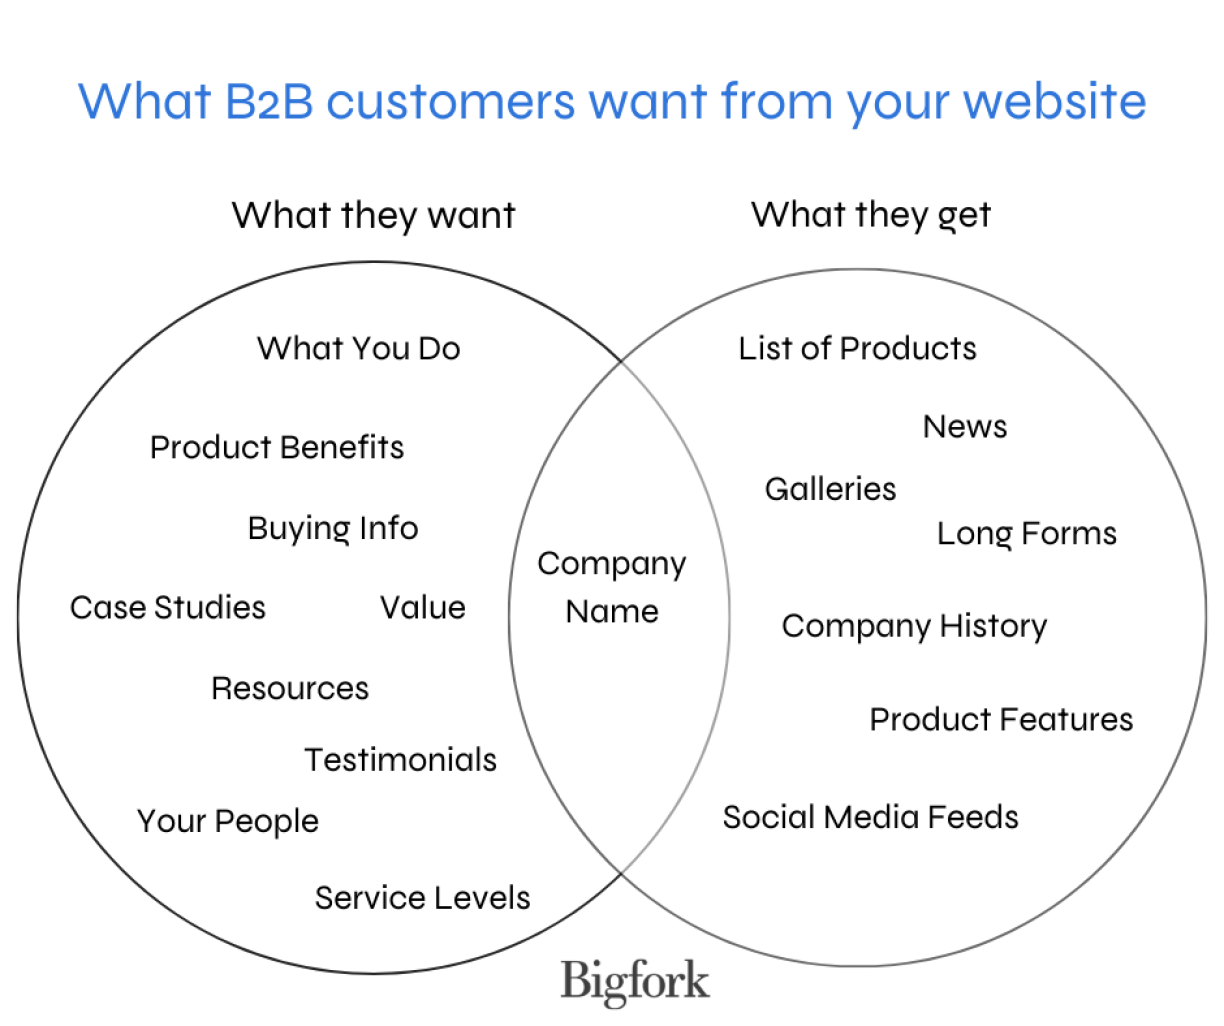 What B2B customers want from your website